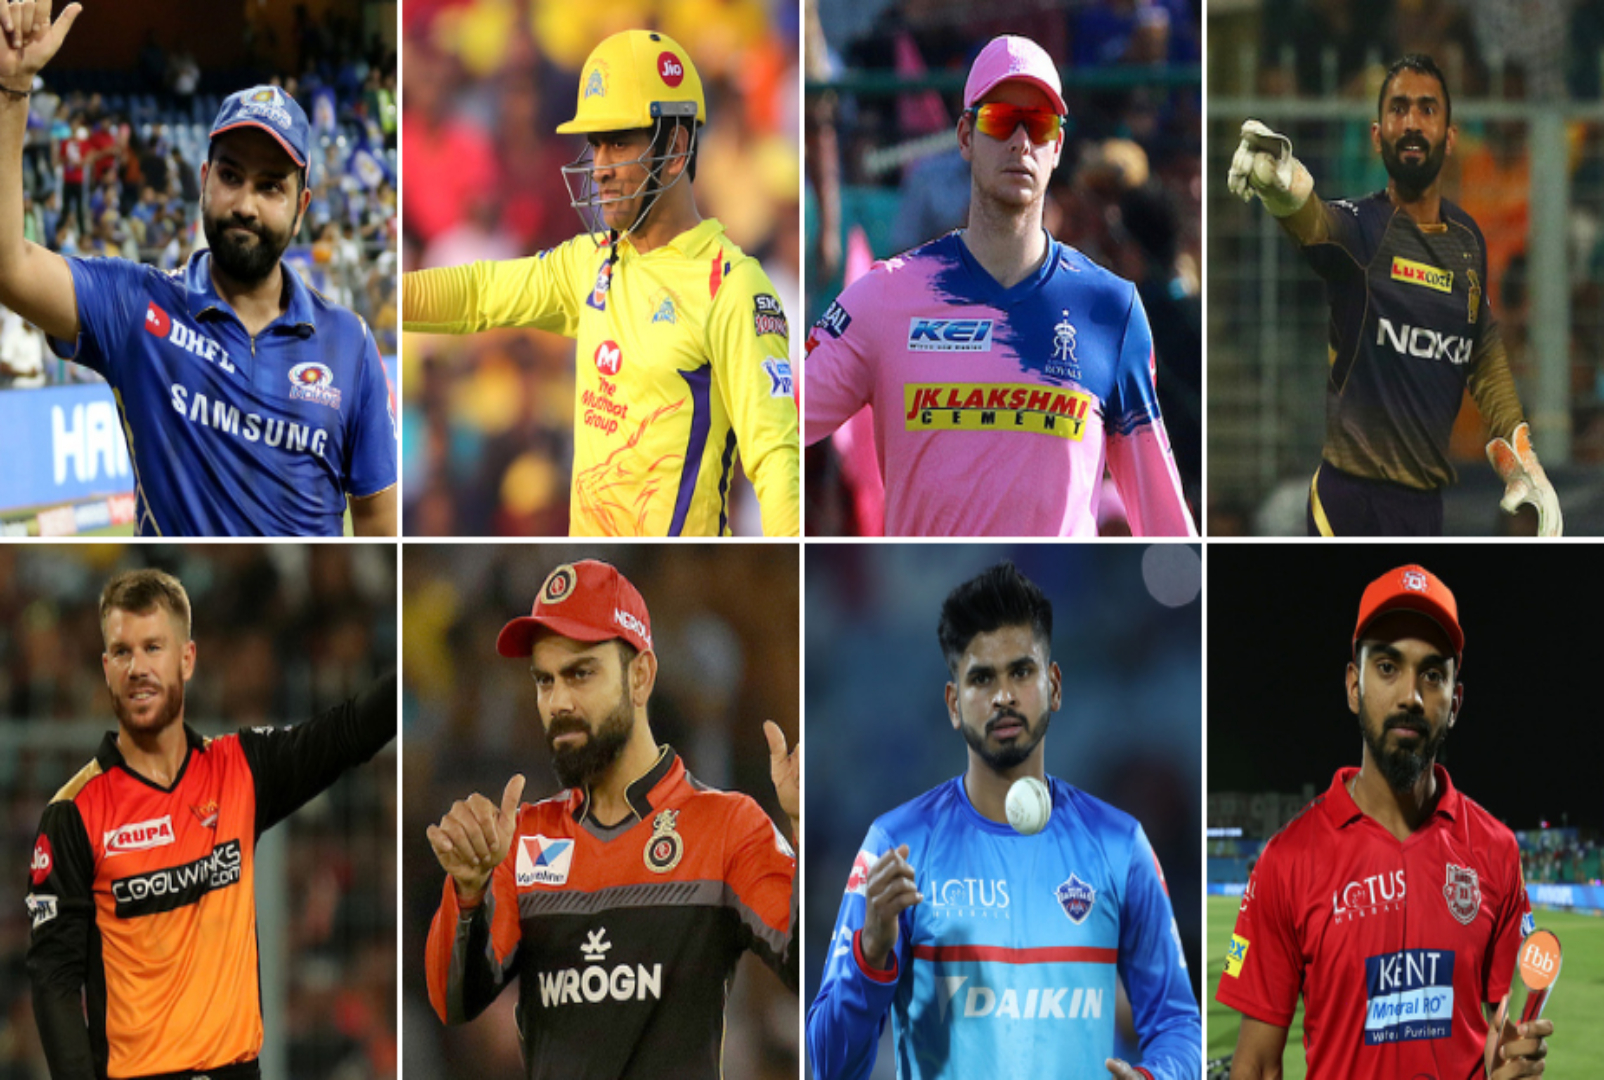 IPL Beats Coronavirus As Indias Most Searched In 2020 On Google